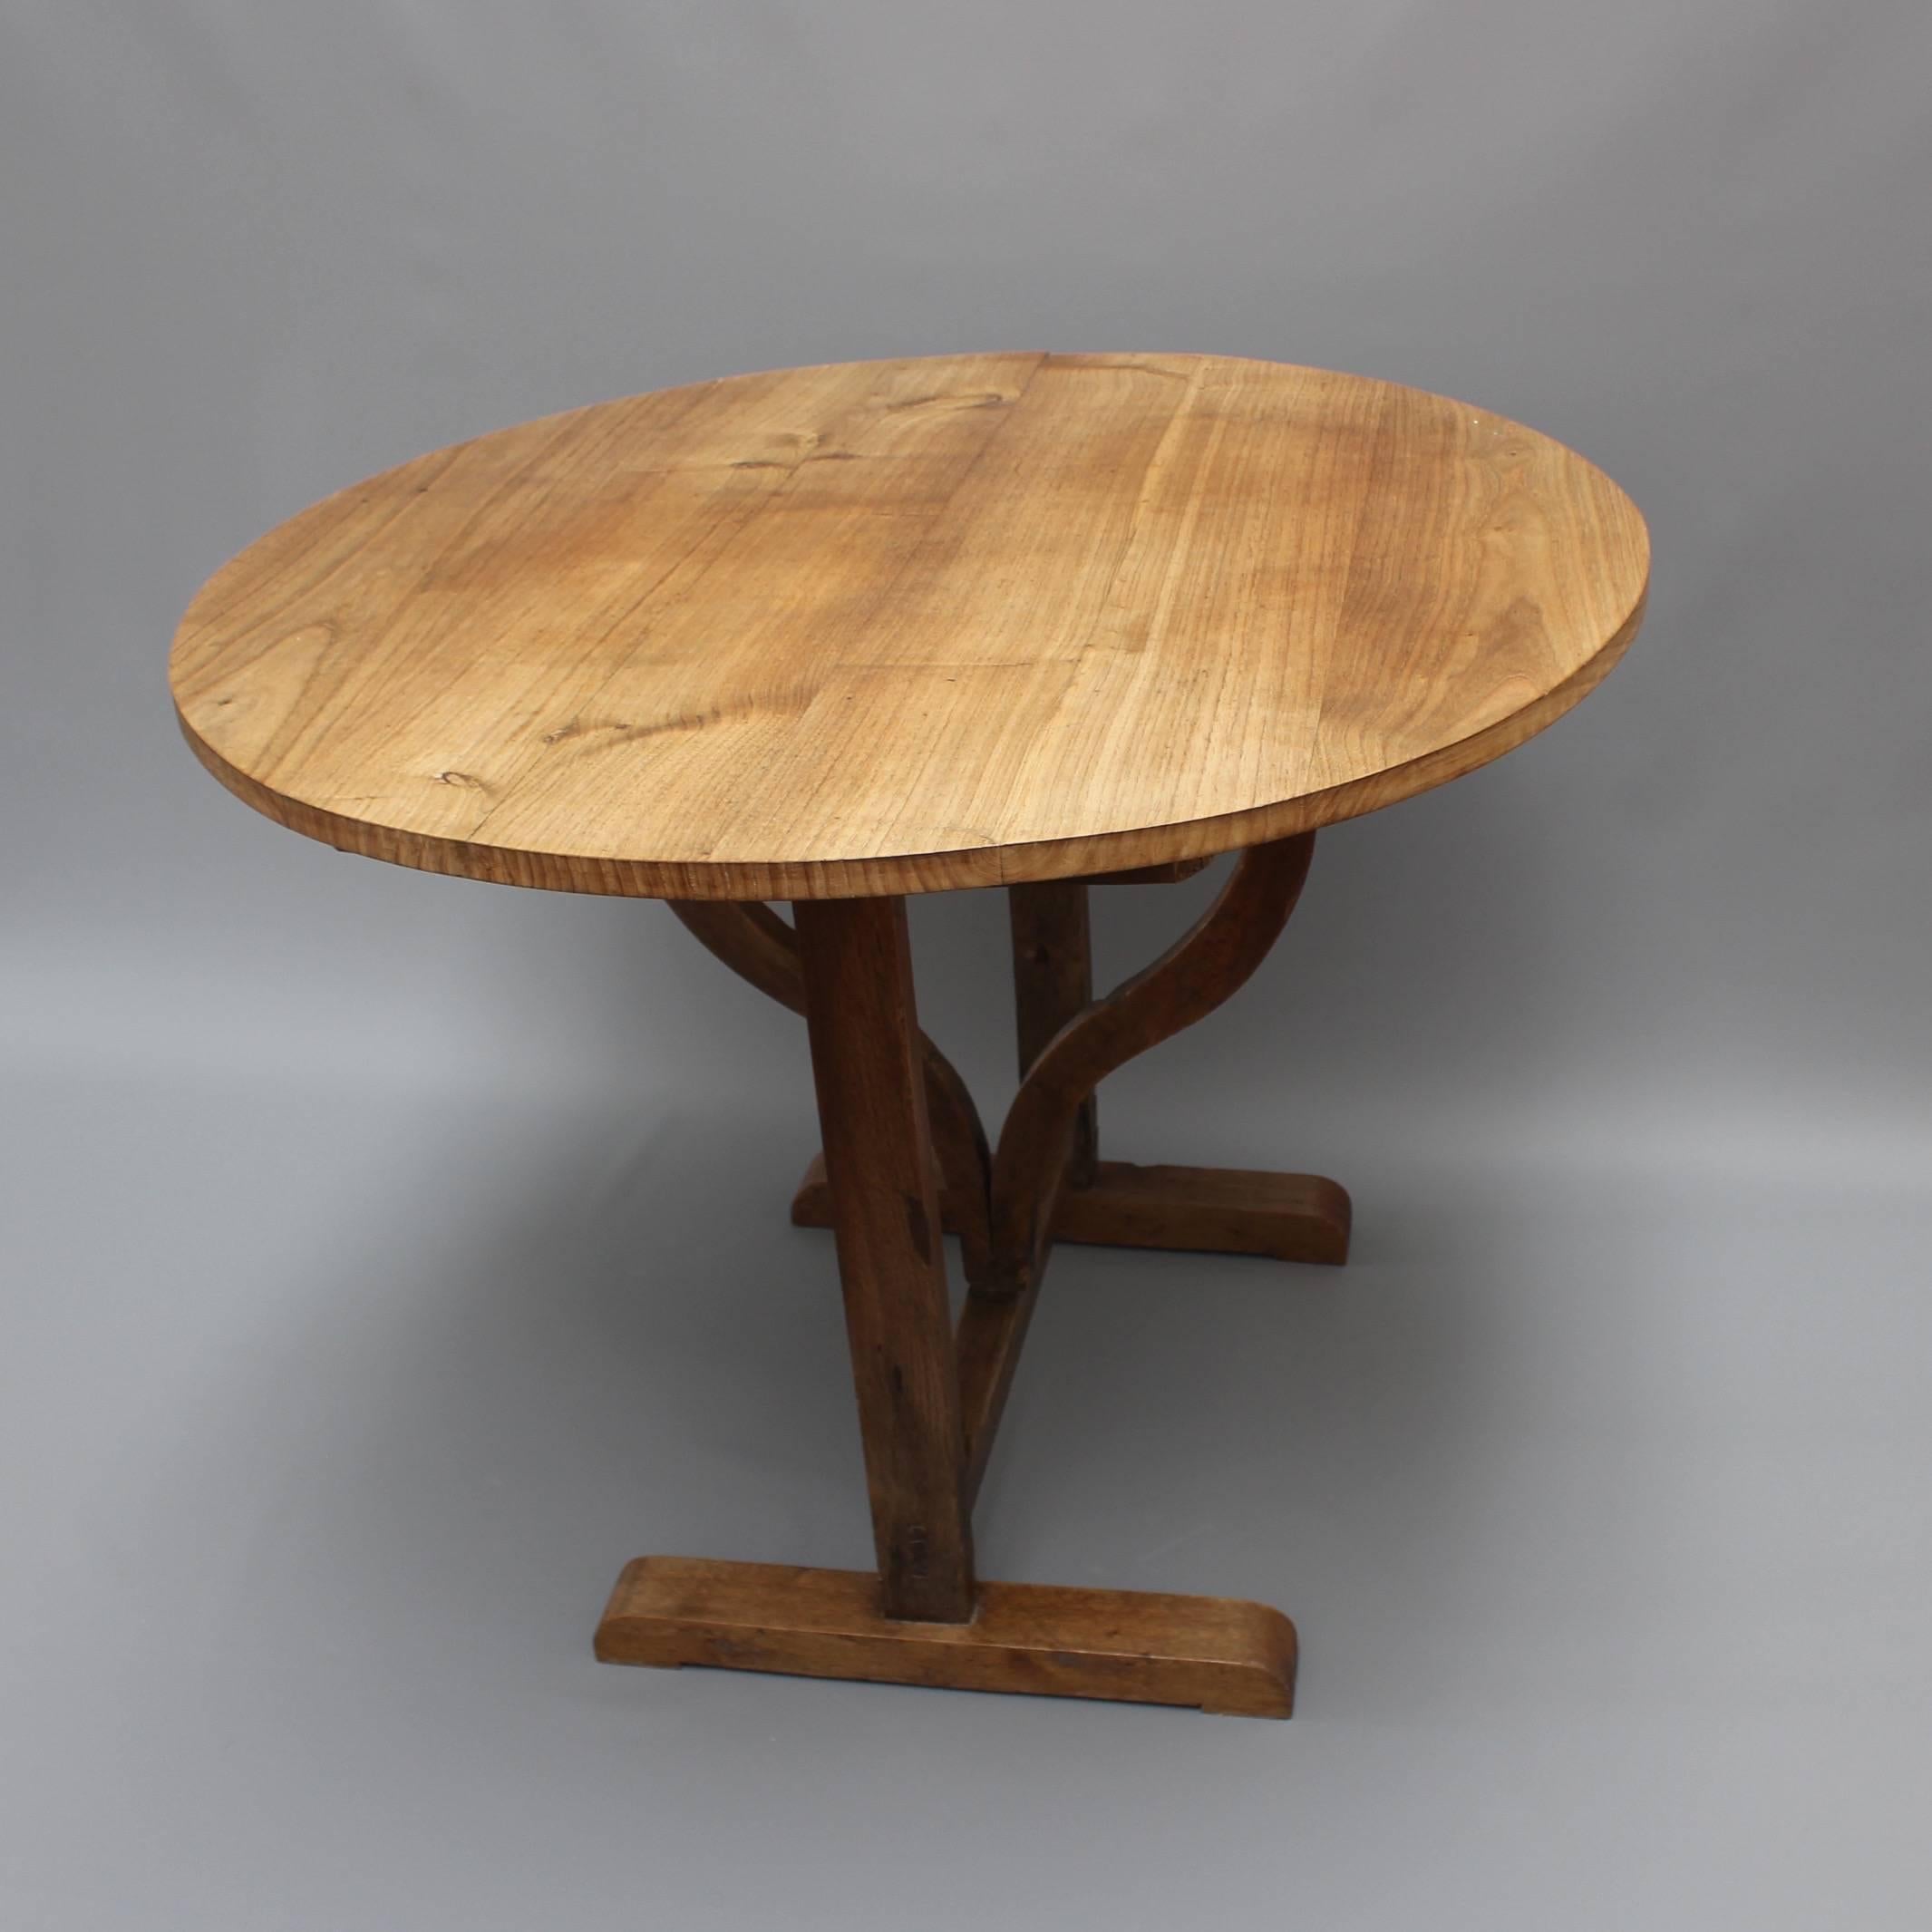 The Reconditioned French Table de Vigneron, or winemaker's table, from the Burgundy region of France, circa 1850s. These tables were used in the many wine growing regions of France and were particularly useful at harvest time because their tilt-top